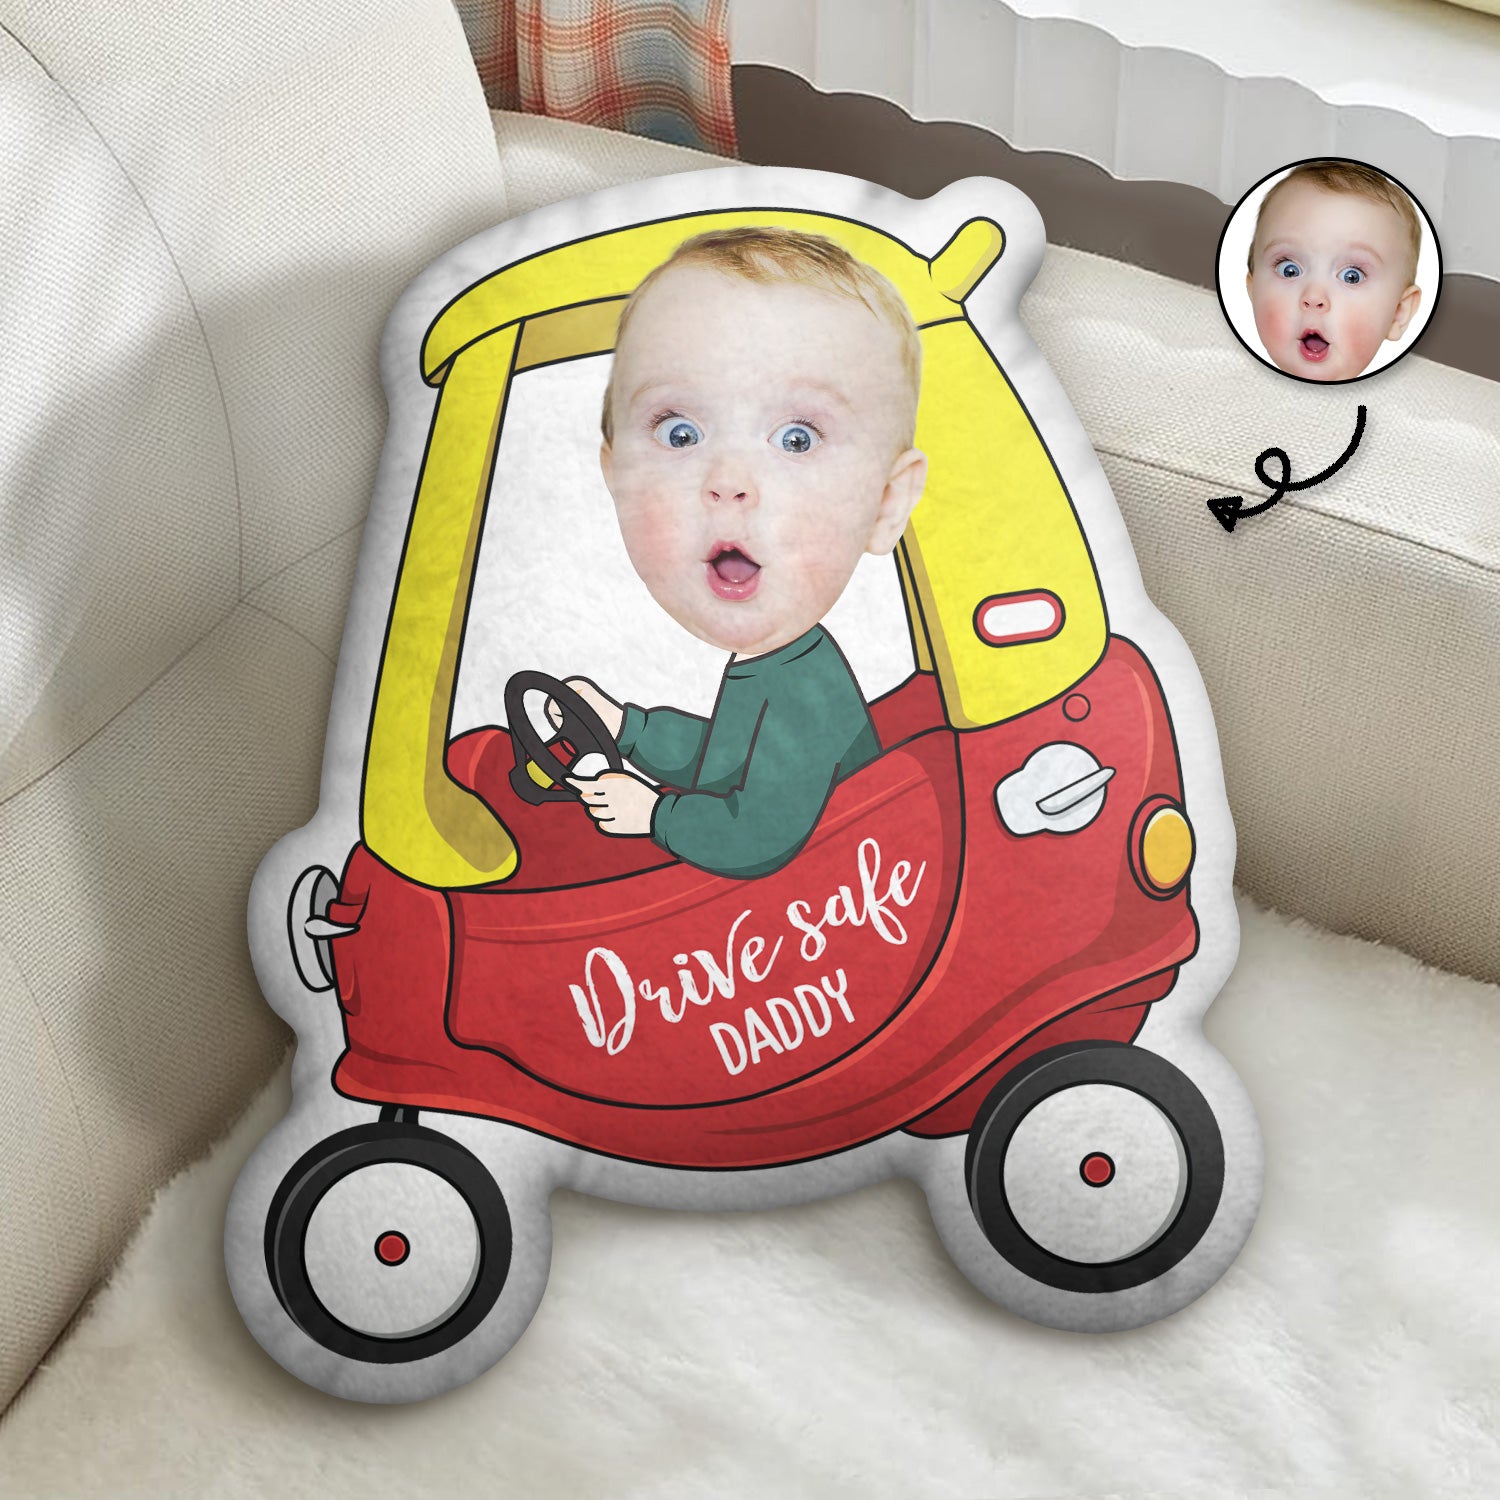 Custom Photo Drive Safe Daddy - Birthday, Loving Gift For Dad, Father, Papa, Grandpa - Personalized Custom Shaped Pillow